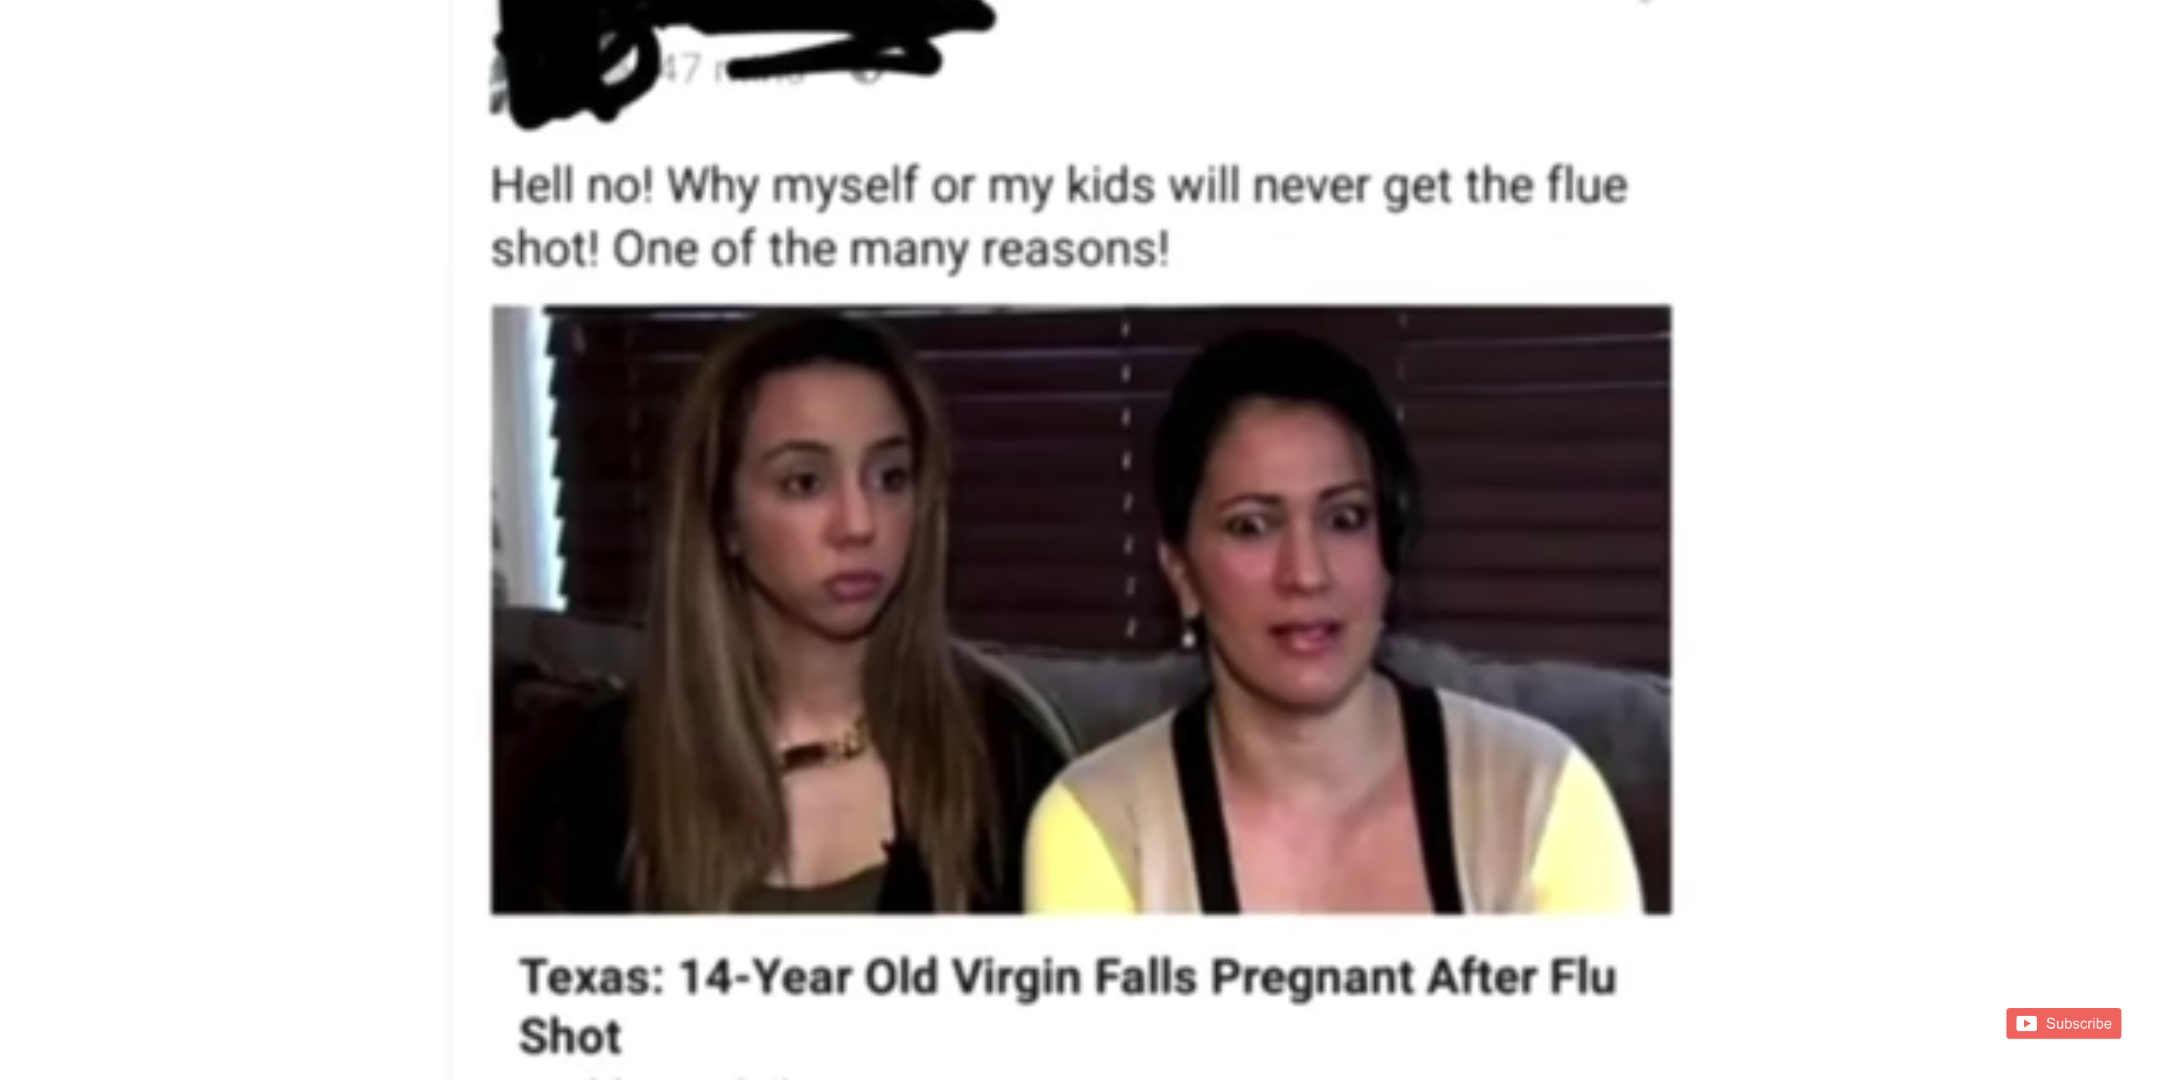 ThIS iS WhY My ChILd iS nOt geTiNg a VacCiNe